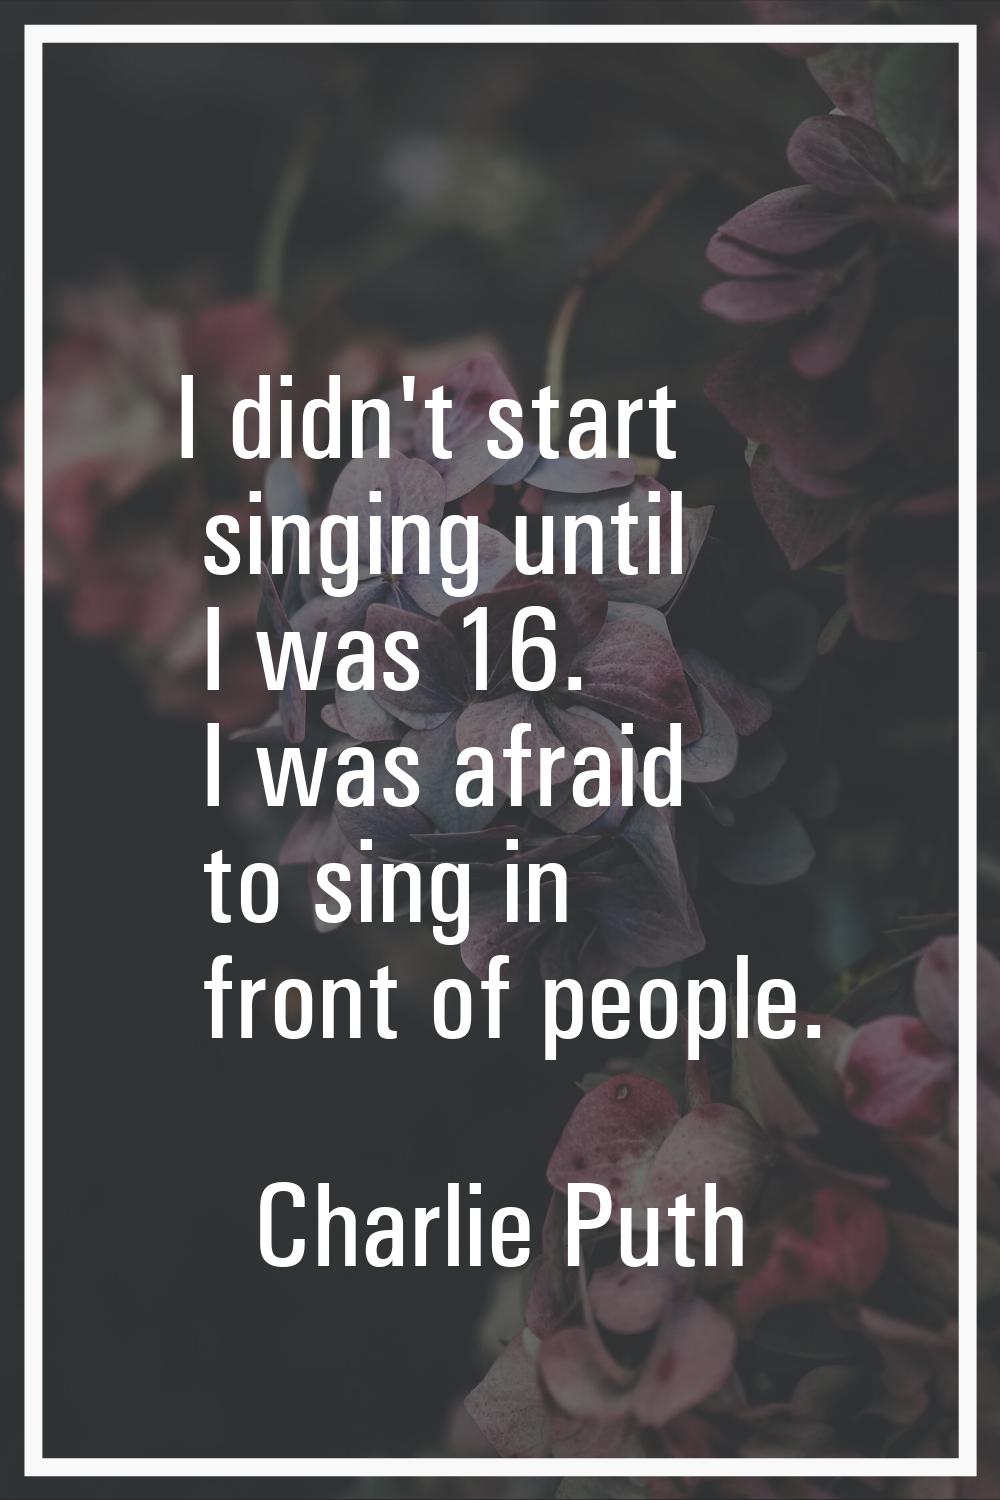 I didn't start singing until I was 16. I was afraid to sing in front of people.